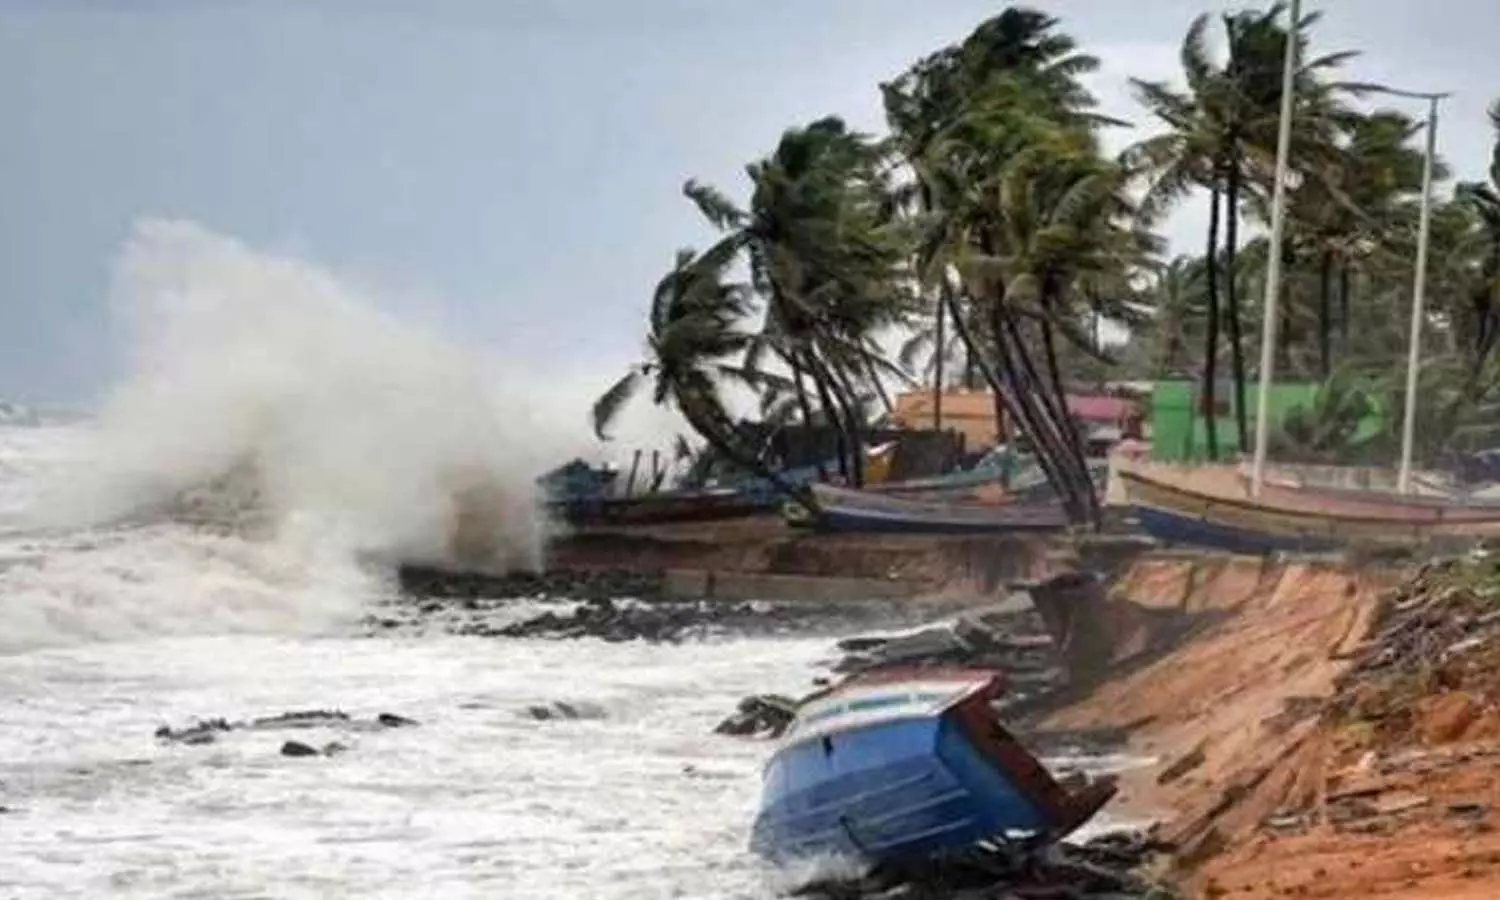 Disruption in the celebration of Deepawali, cyclonic storms can wreak havoc today and tomorrow